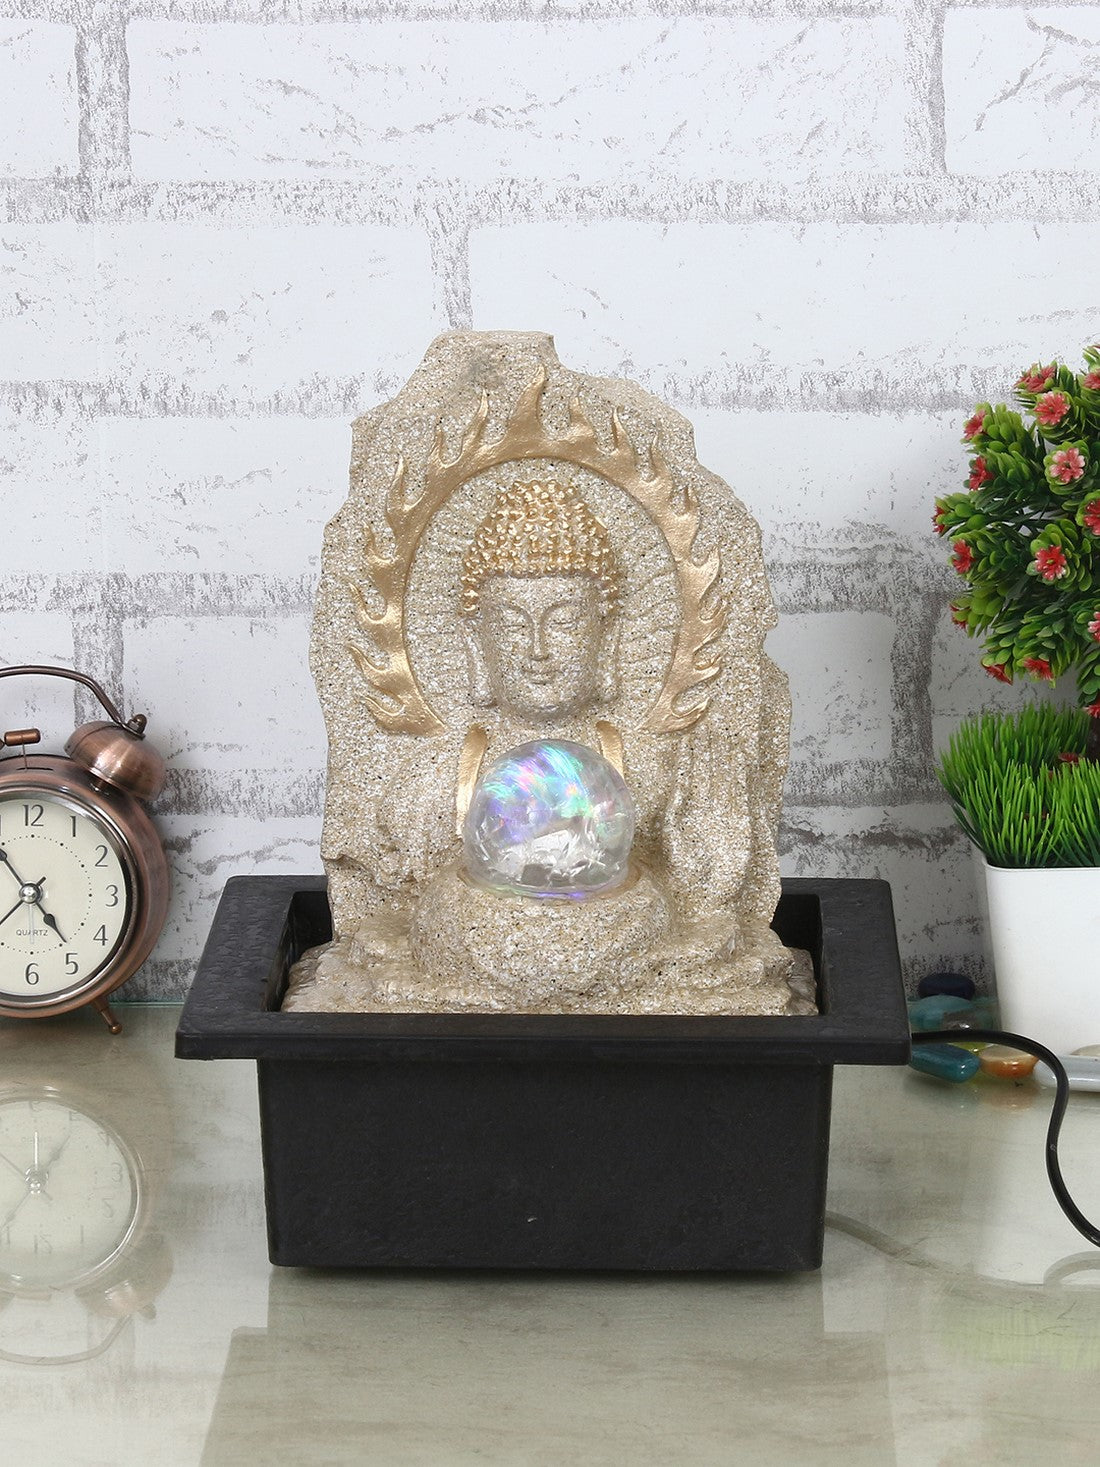 Decorative Buddha with Crystal Water Fountain